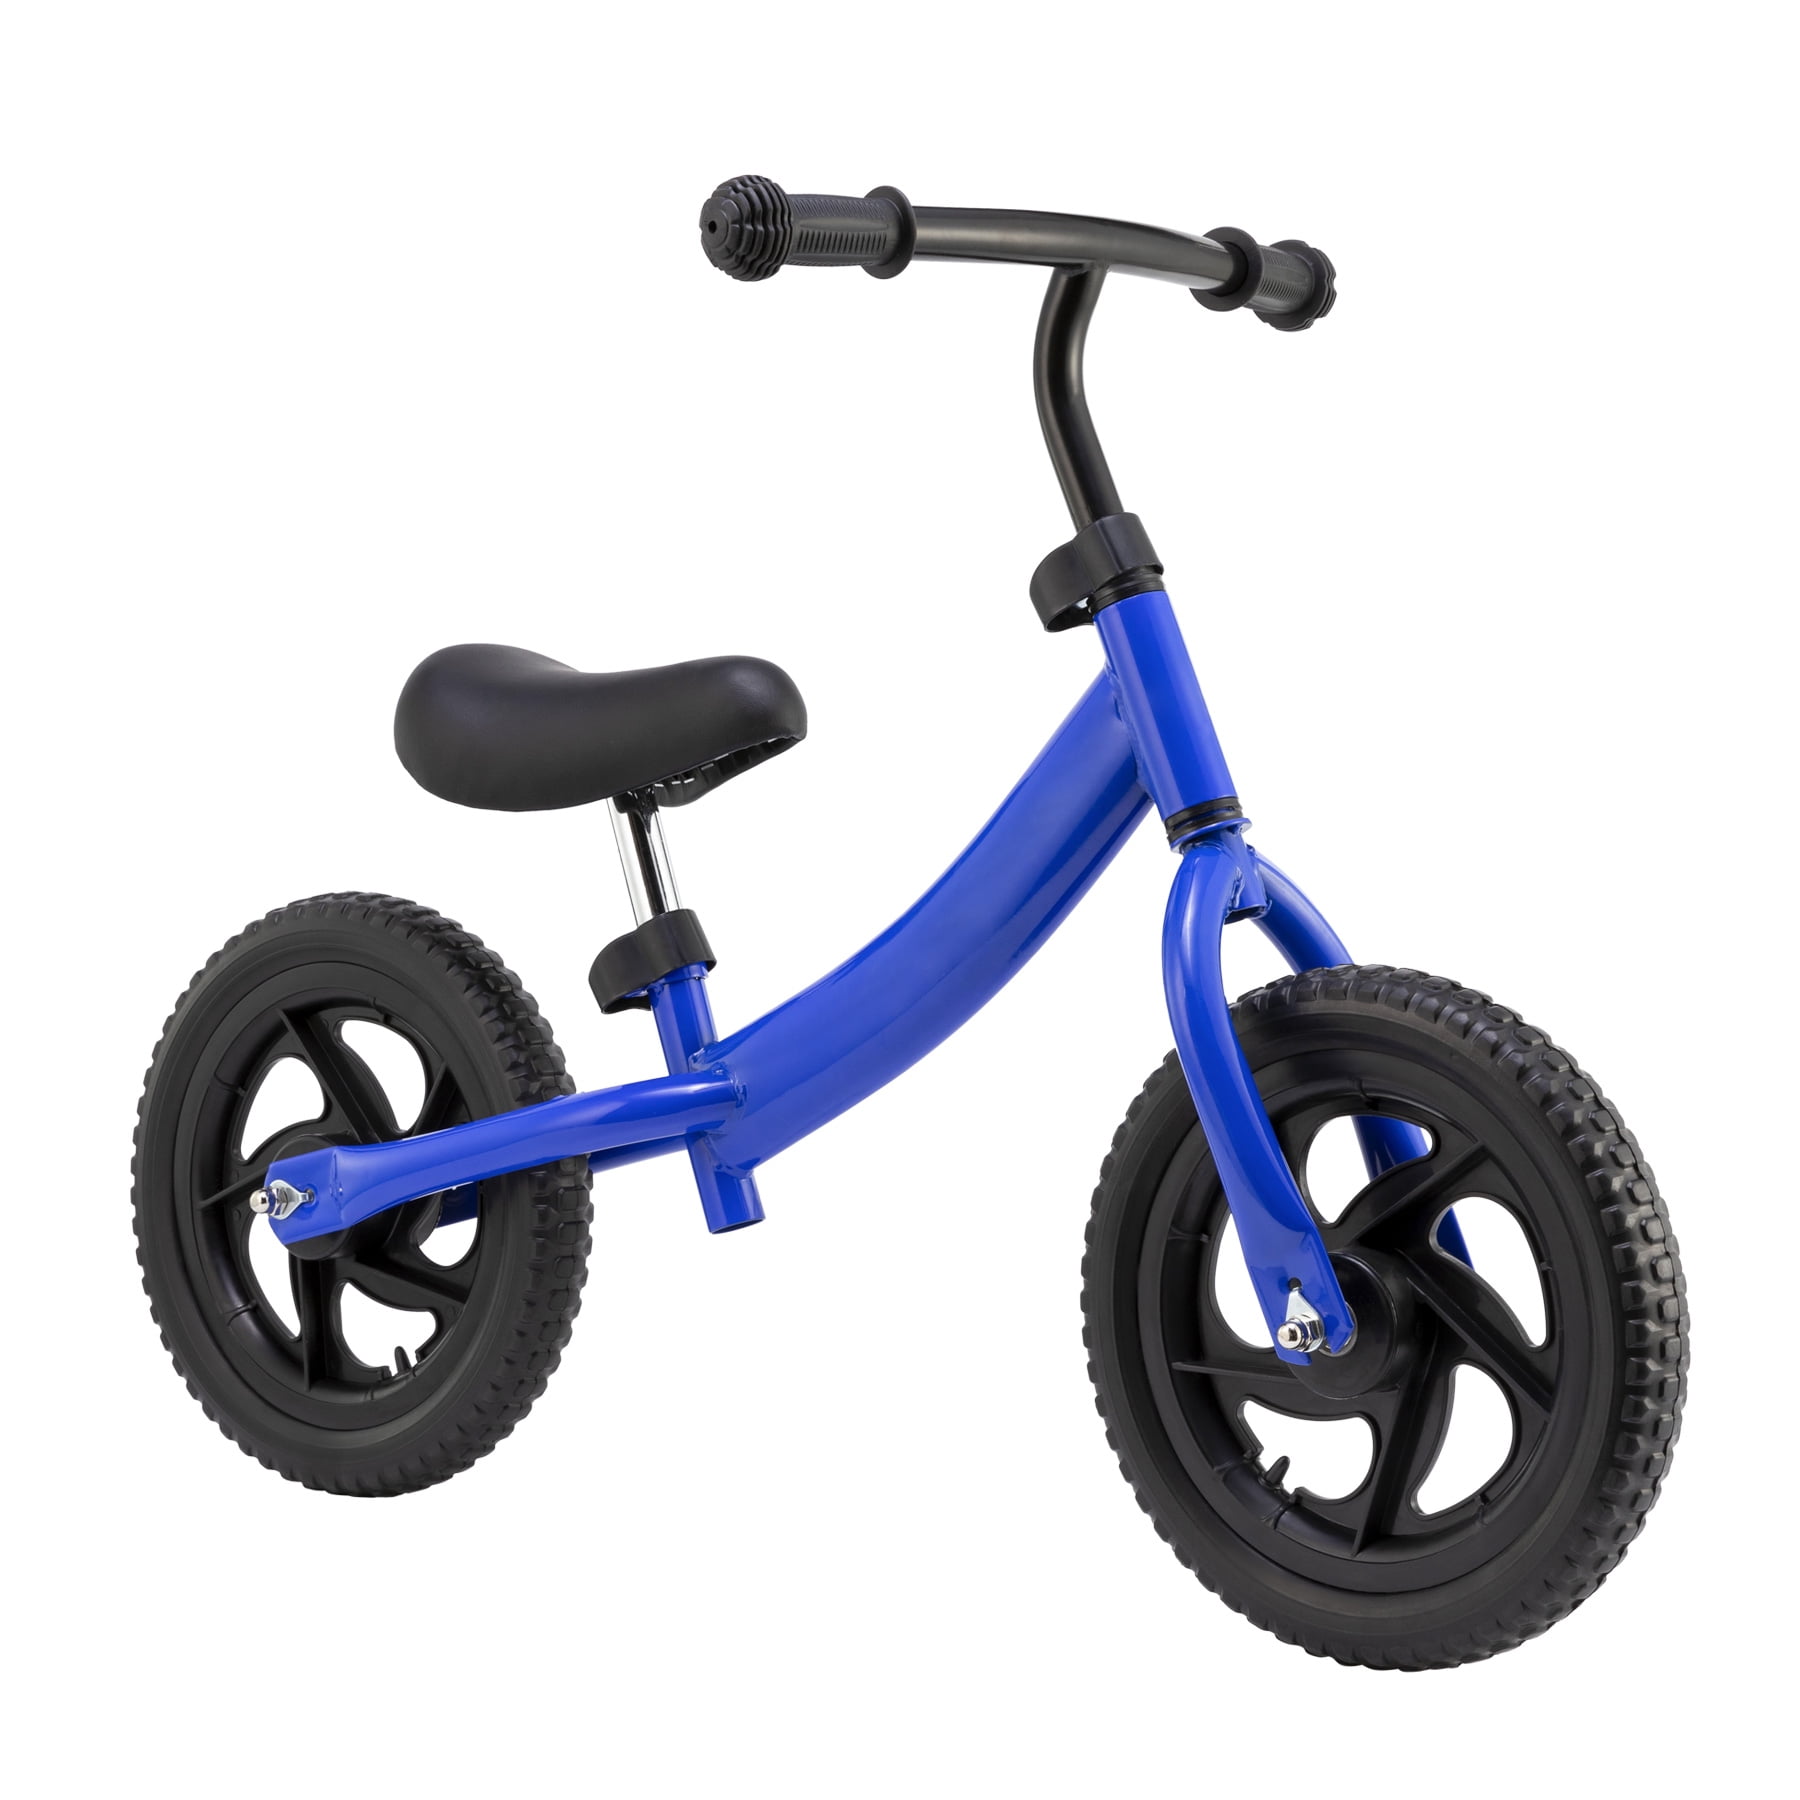 Outdoor Toy for Girls & Boys Adjustable Training Balance Bike for Big Kids Viribus 14 Kids Balance Bike with Basket Bell & Rubber Tires Carbon Steel No Pedal Bicycle for 2 3 4 5 6 7 Year Olds 